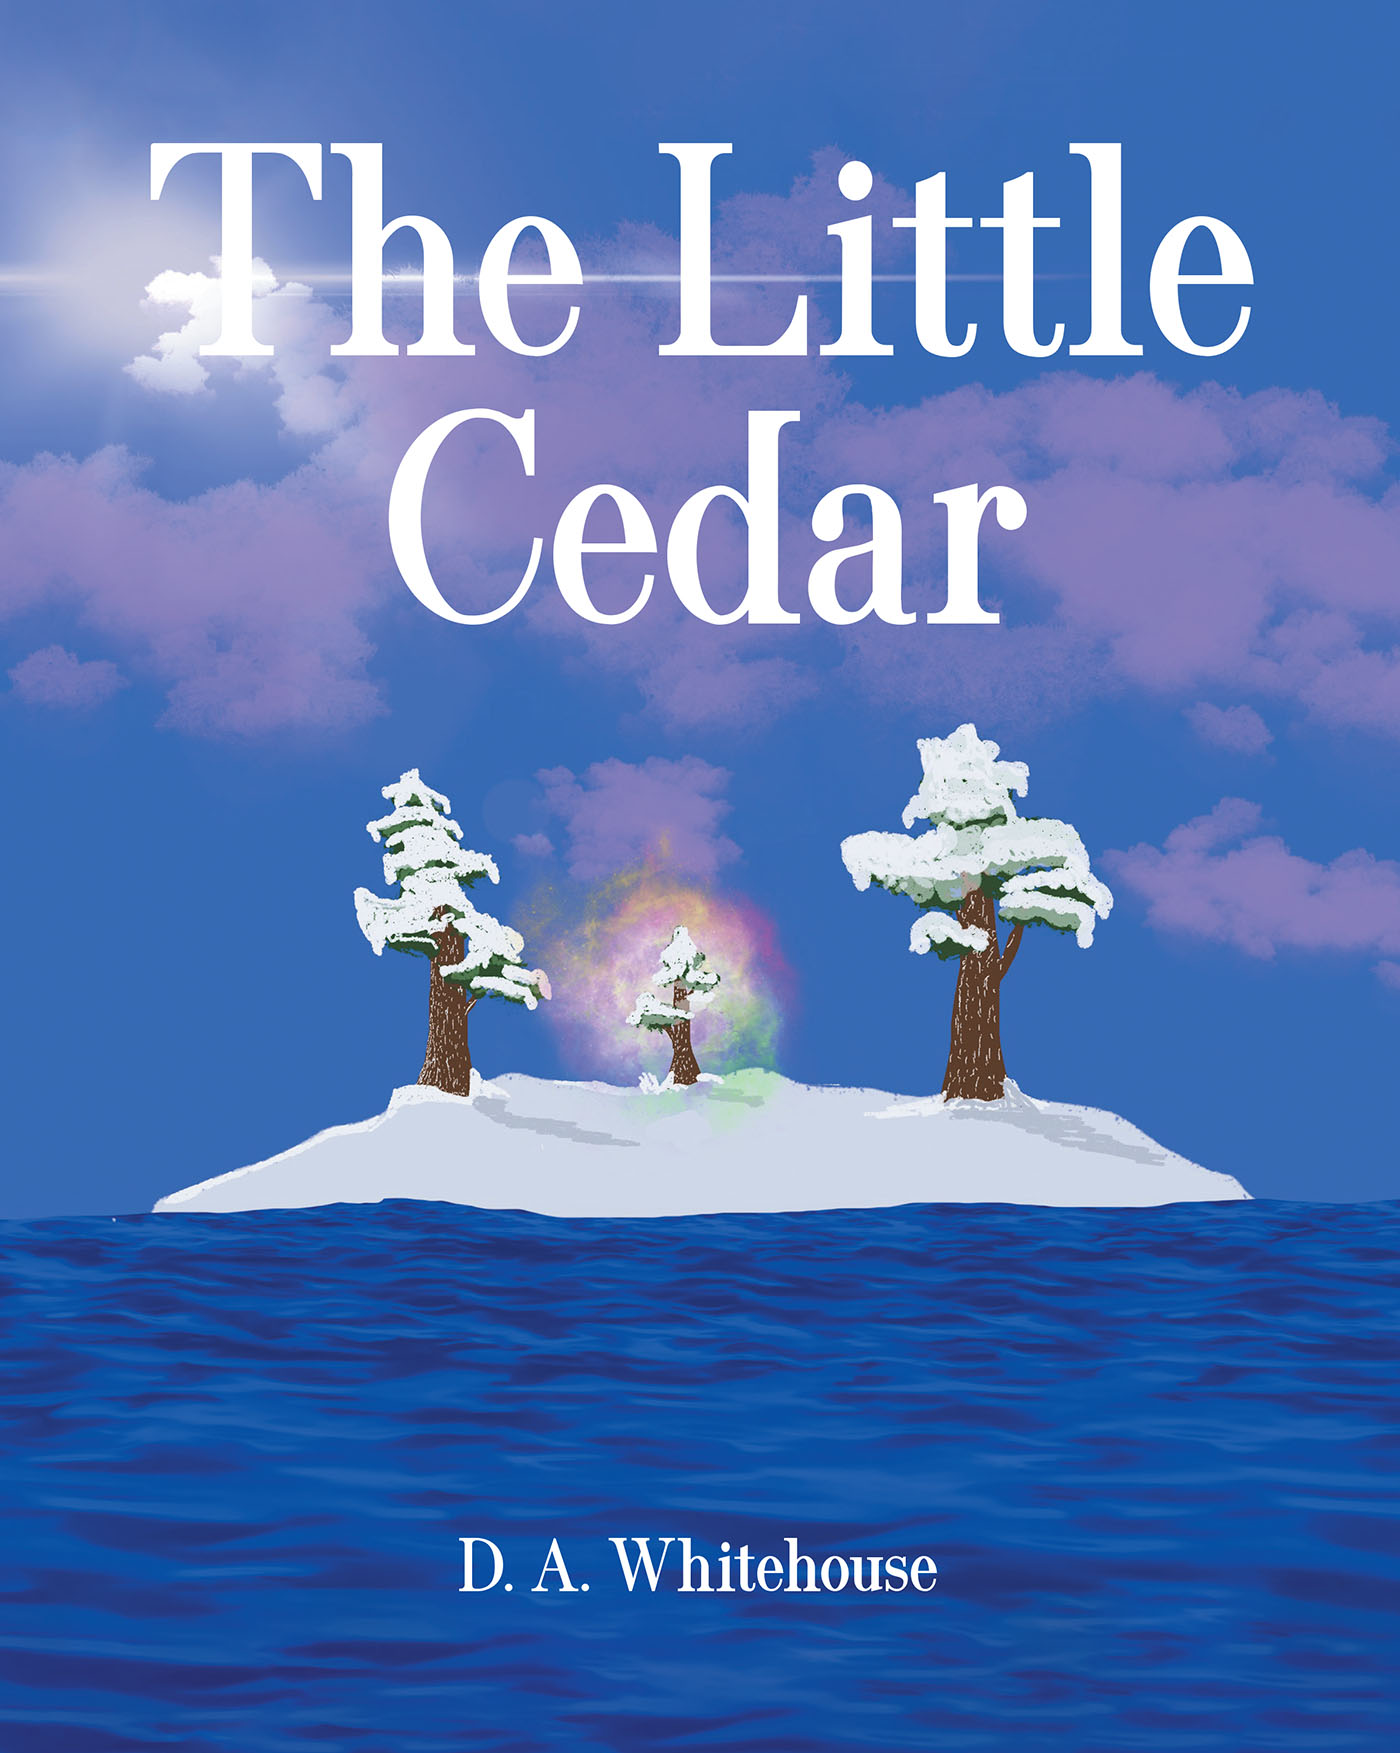 D. A. Whitehouse’s Newly Released “The Little Cedar” is a Heartwarming Story of Faith, Purpose, and Divine Guidance